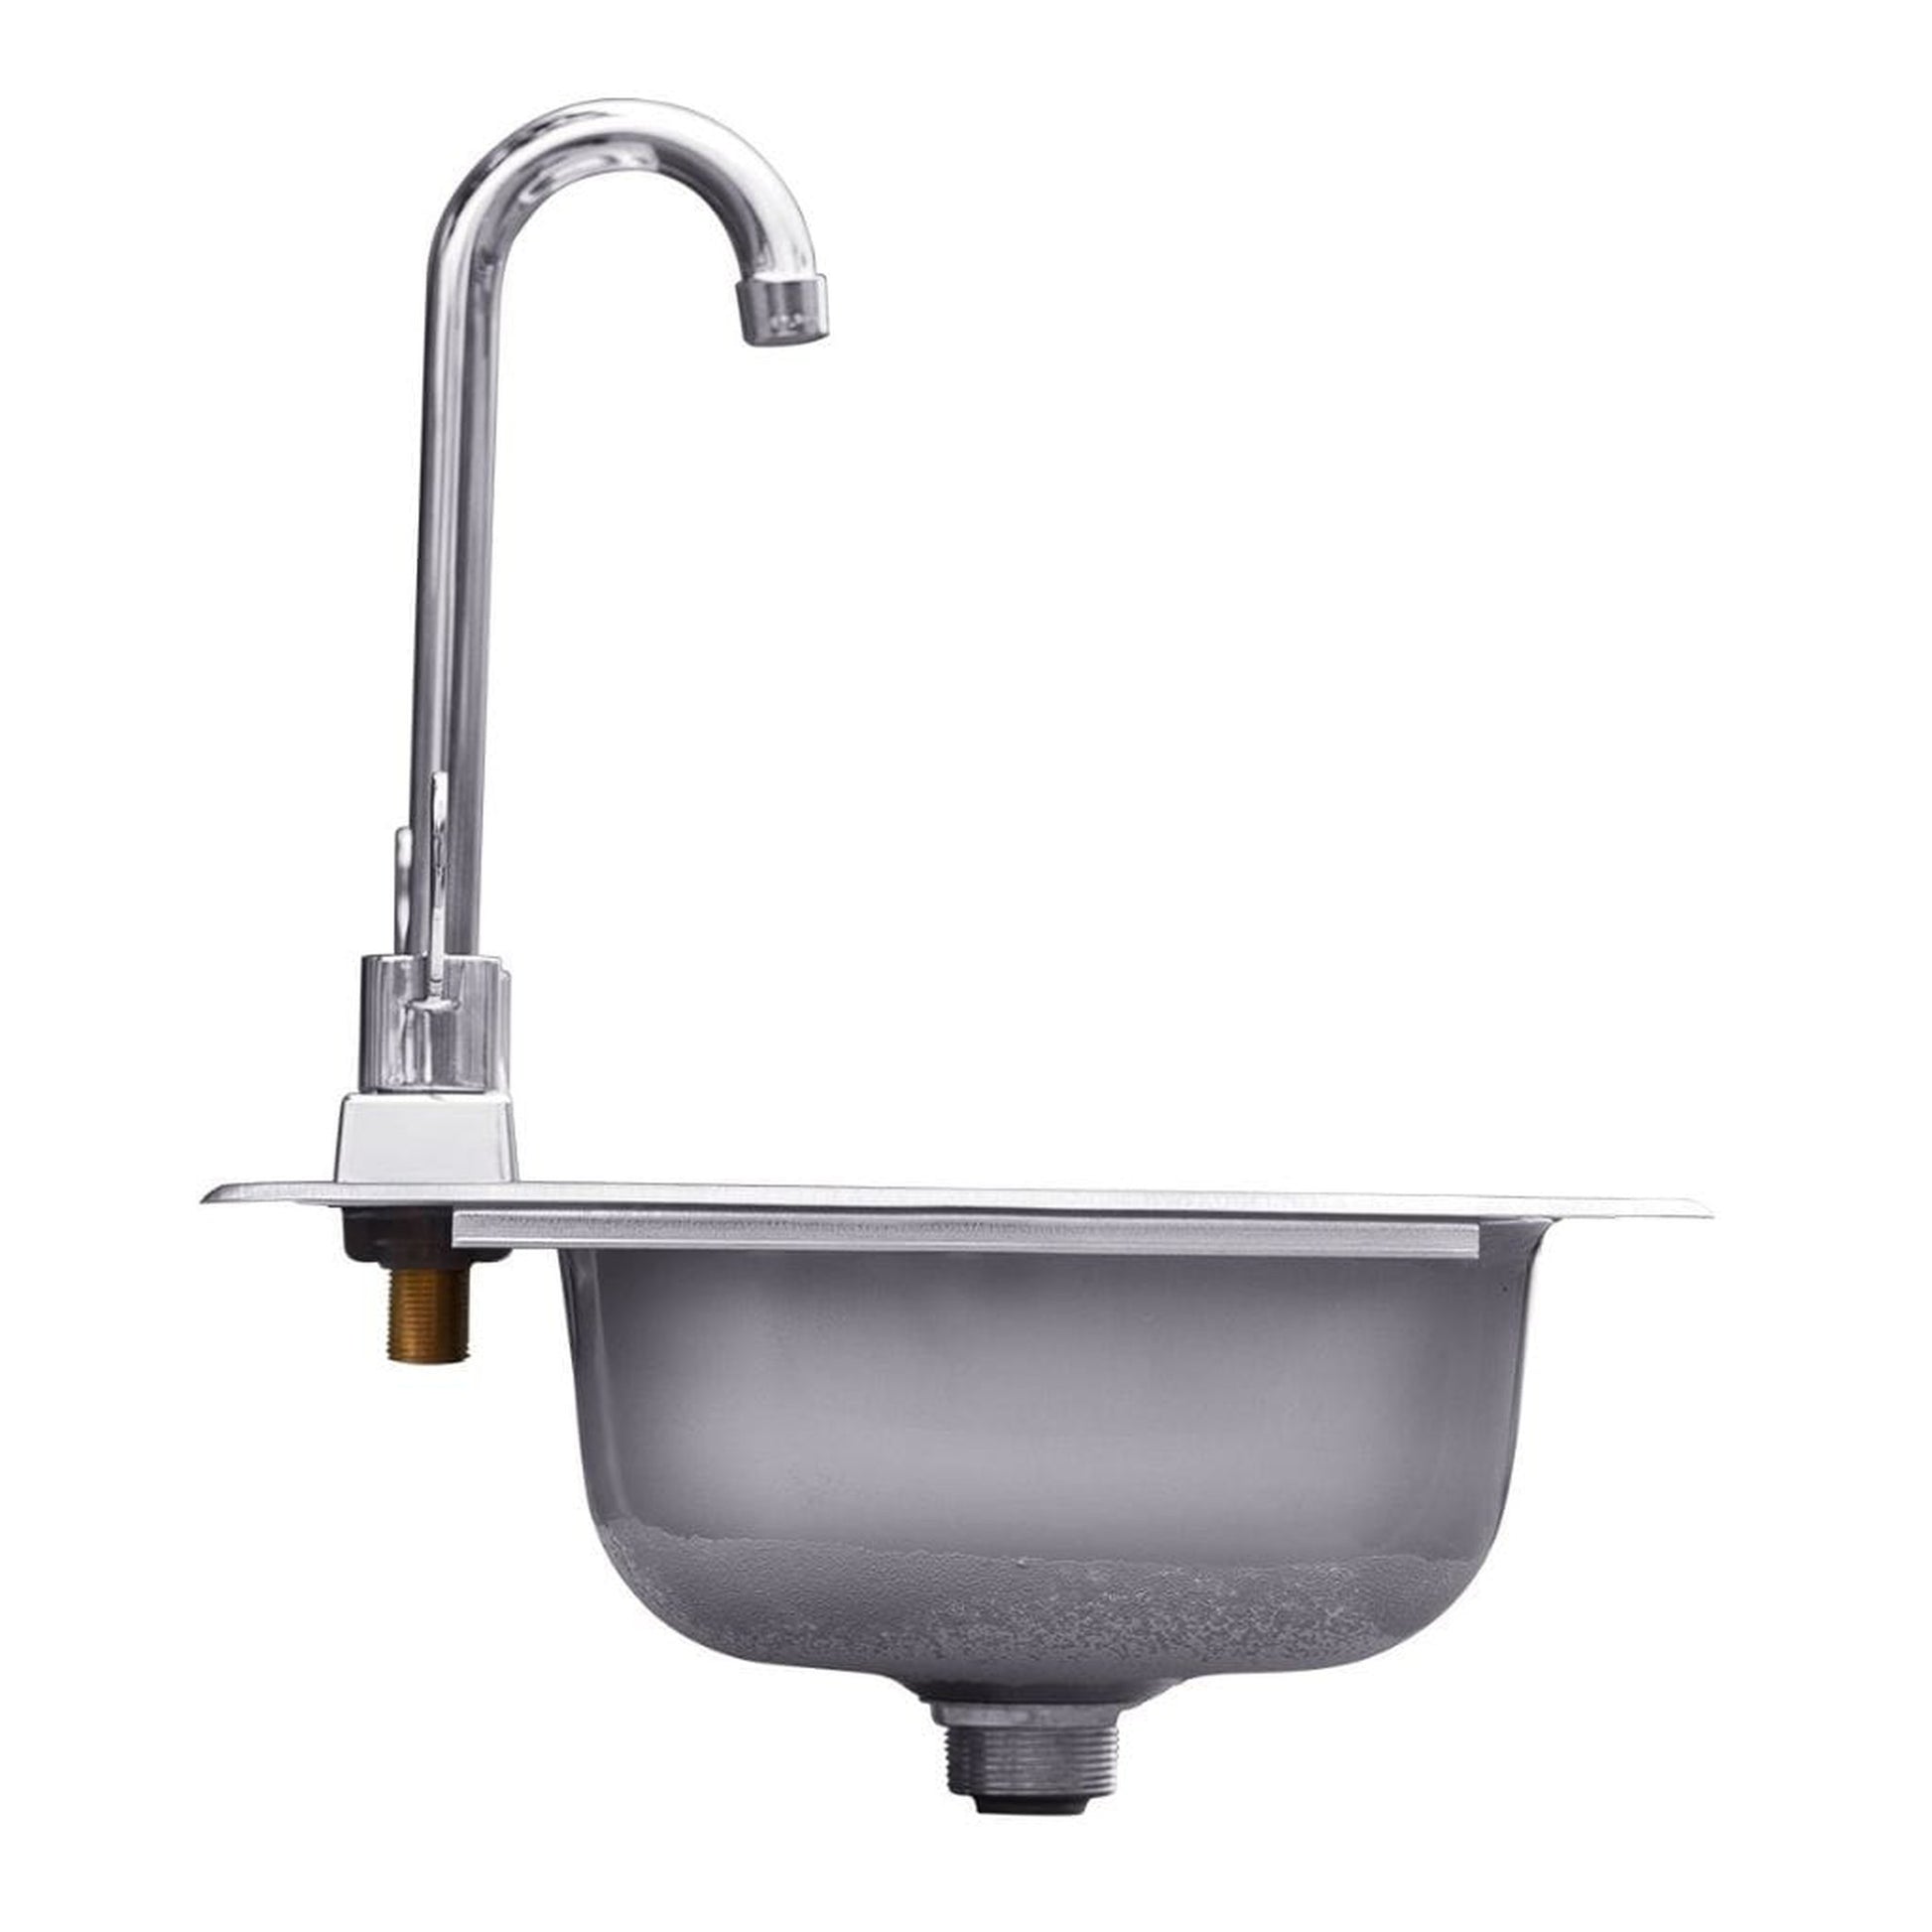 Summerset 15" Stainless Steel Drop-in Sink & Hot/Cold Faucet